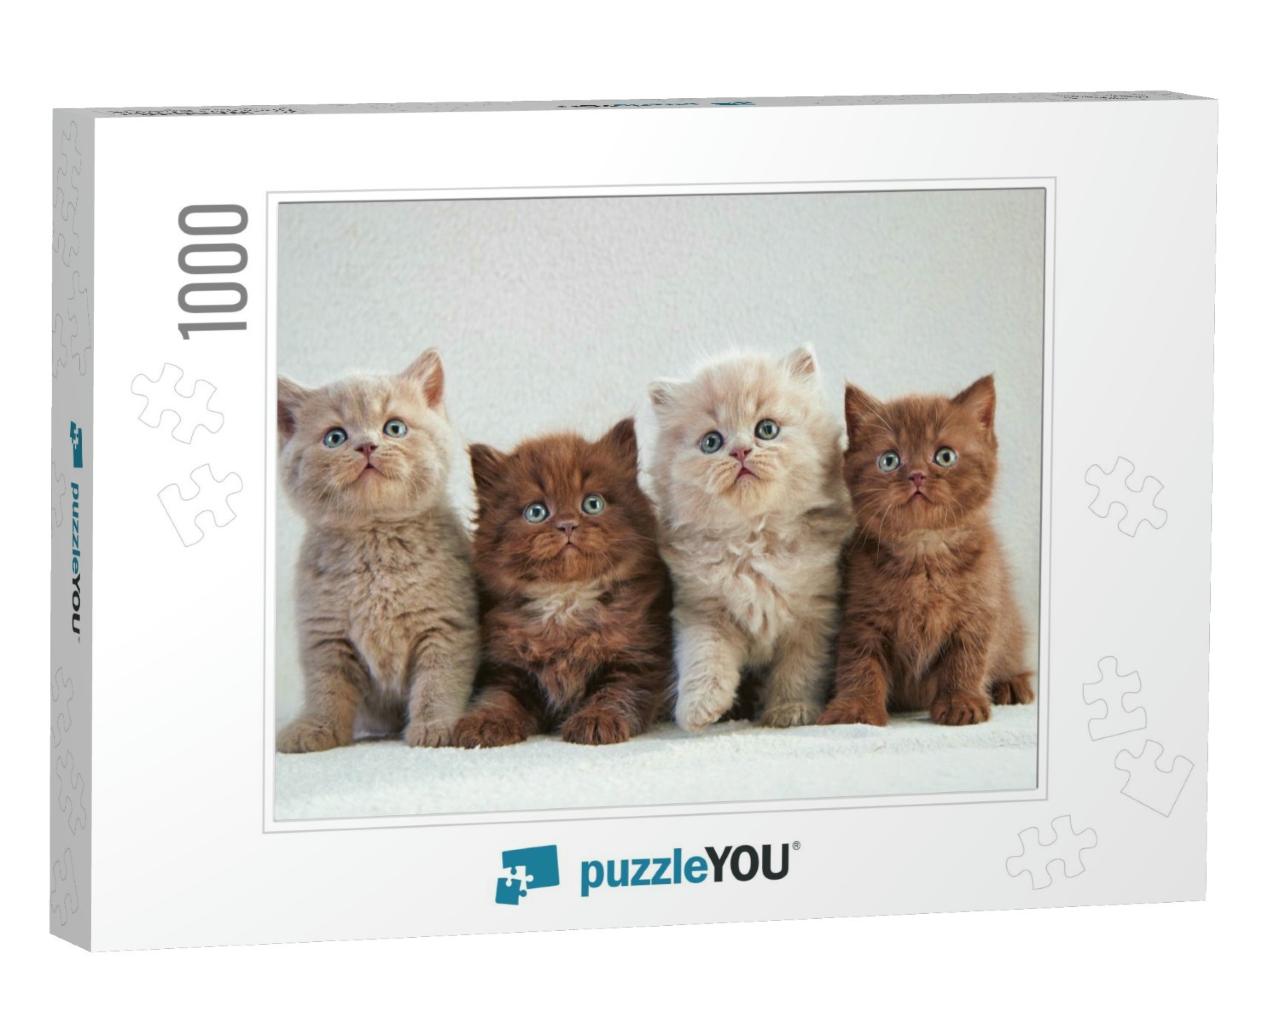 Four Various British Kittens Sitting on Beige Plaid... Jigsaw Puzzle with 1000 pieces